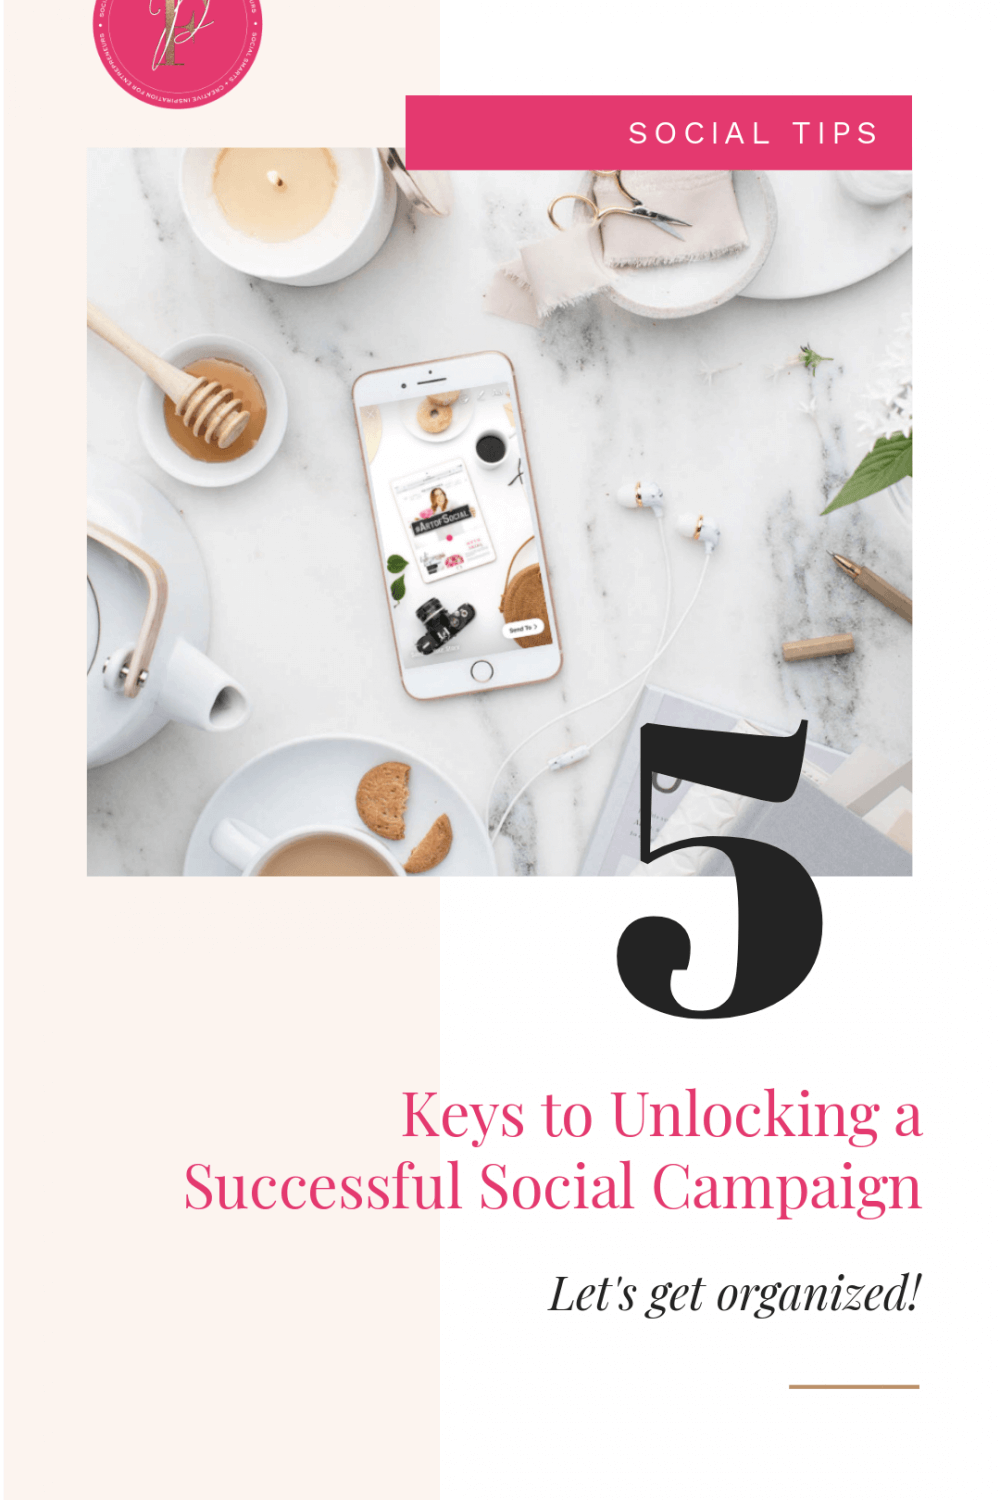 5 keys to unlocking a successful social campaign